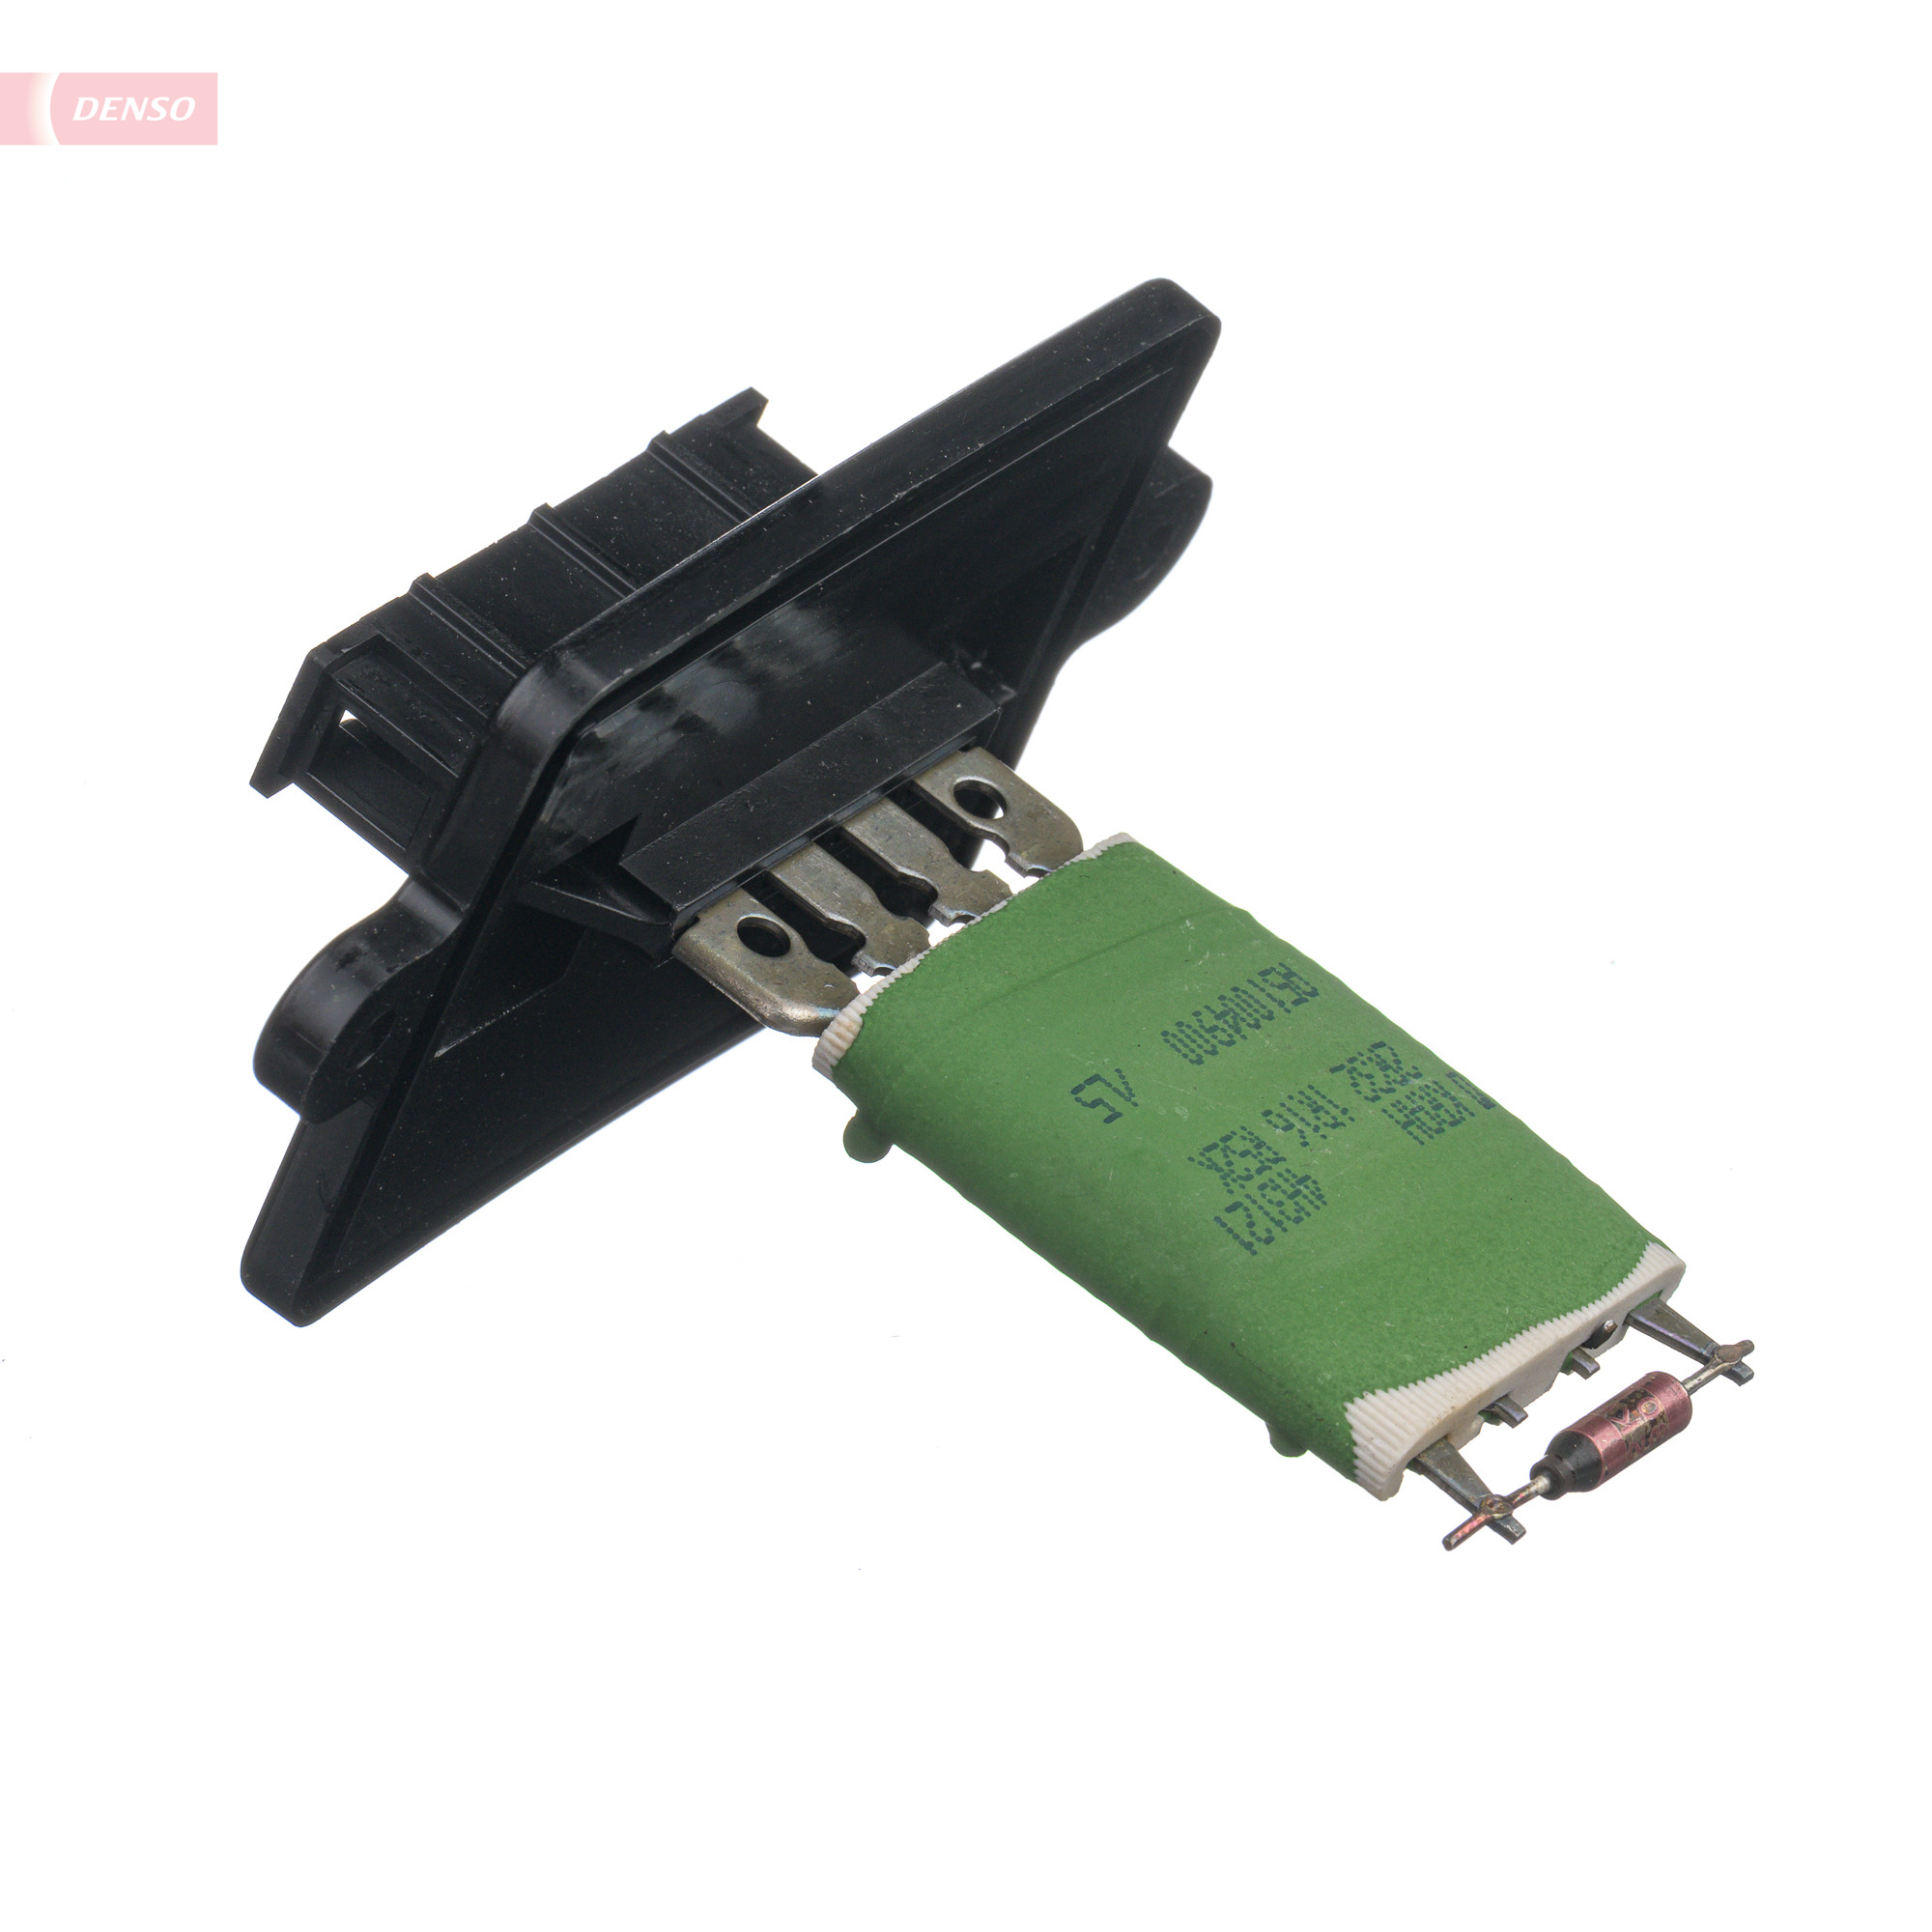 Denso Heater / Blower Resistor DRS23016 [PM2267759]